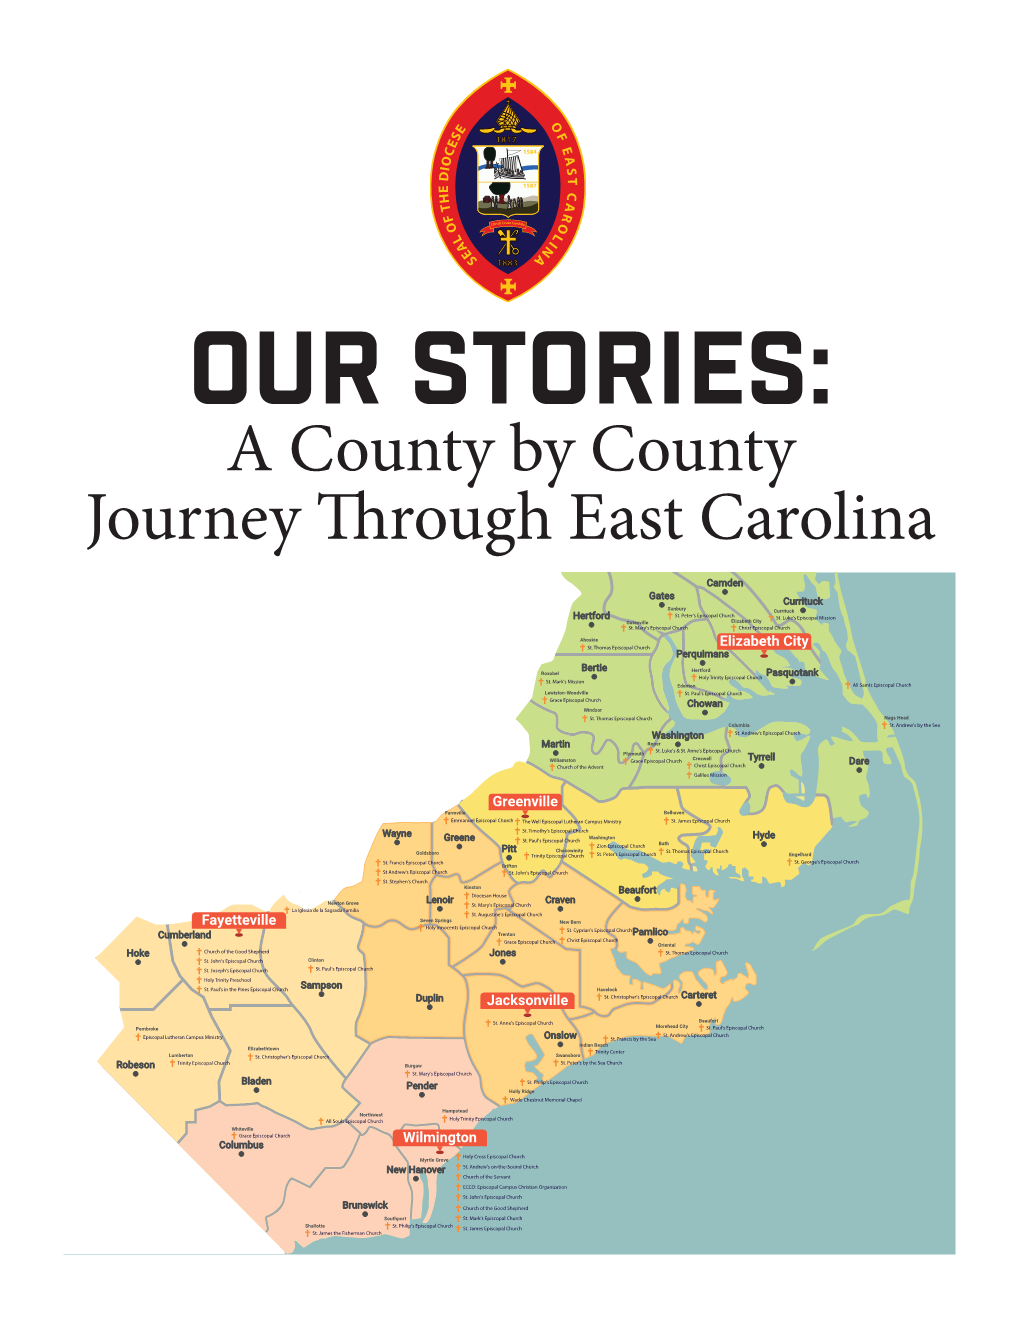 OUR STORIES: a County by County Journey Through East Carolina